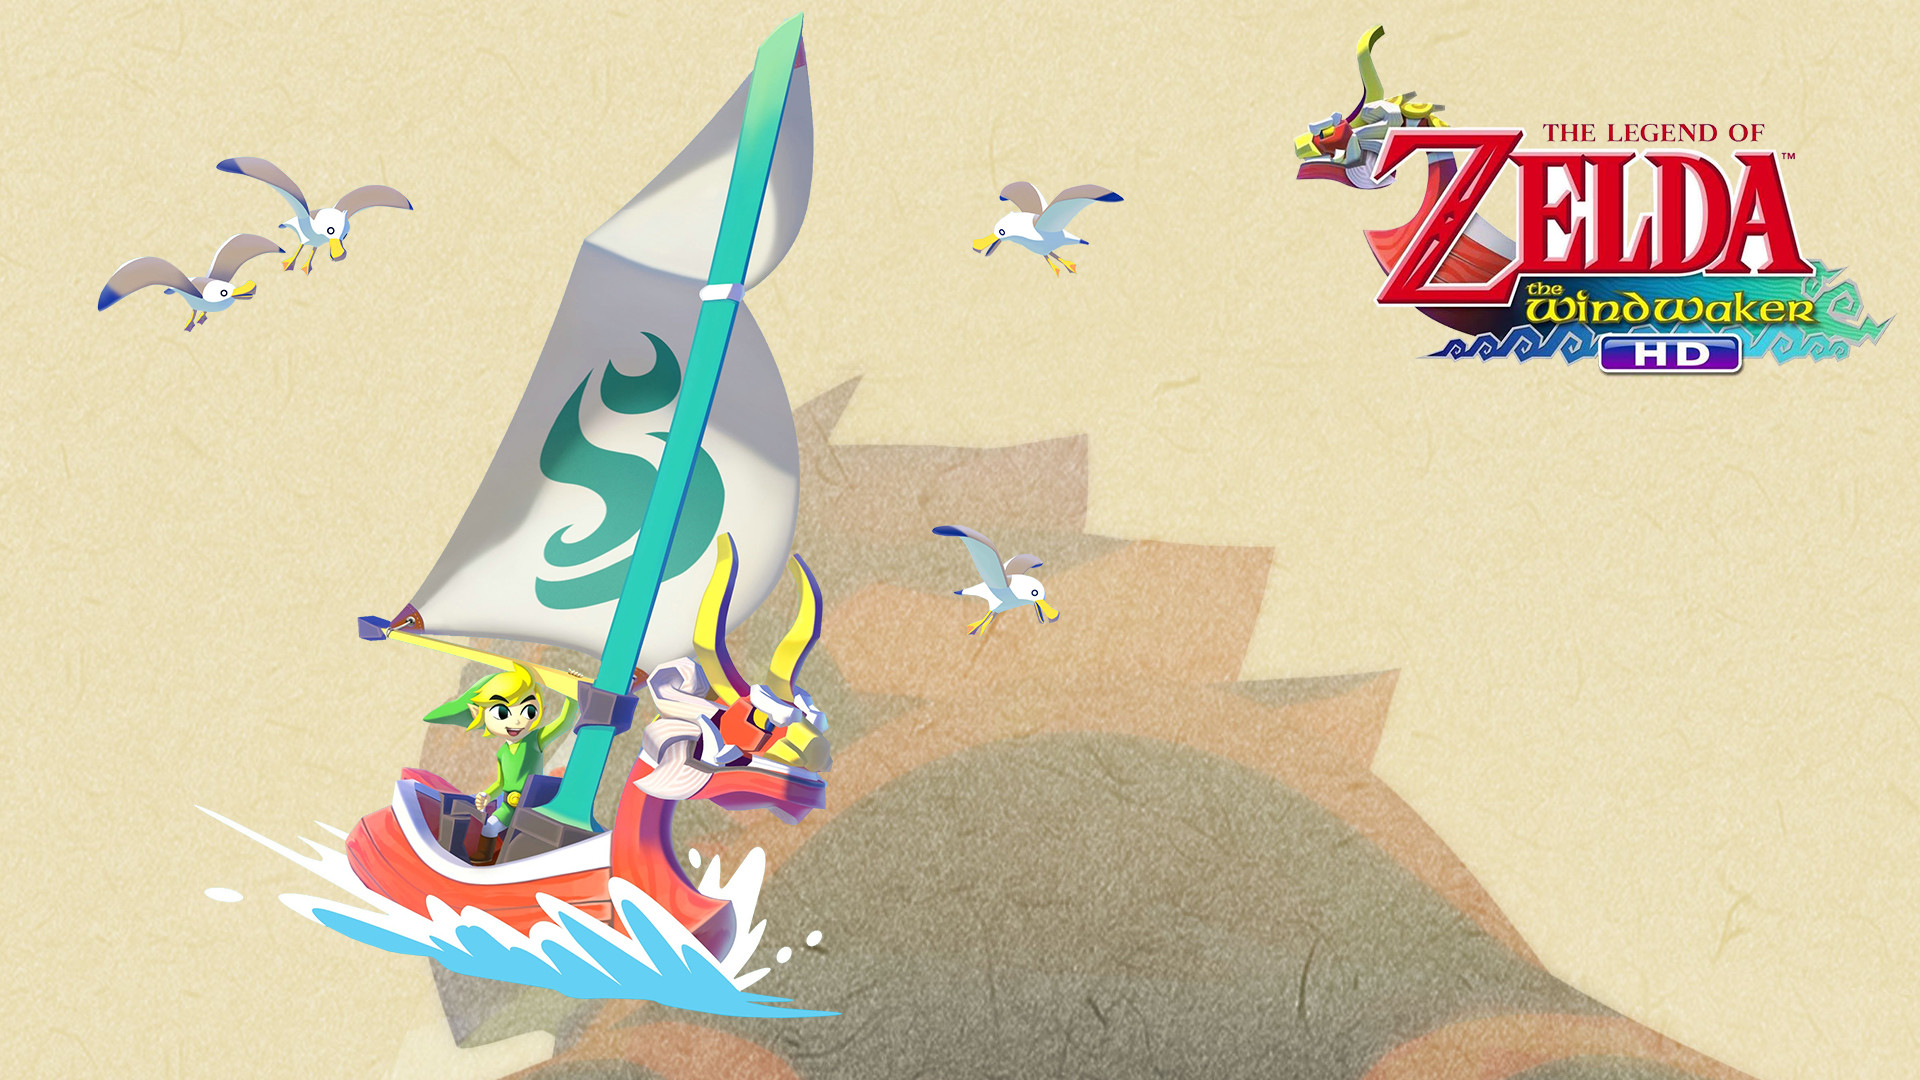 Newest wind waker images in 4k ultra hd